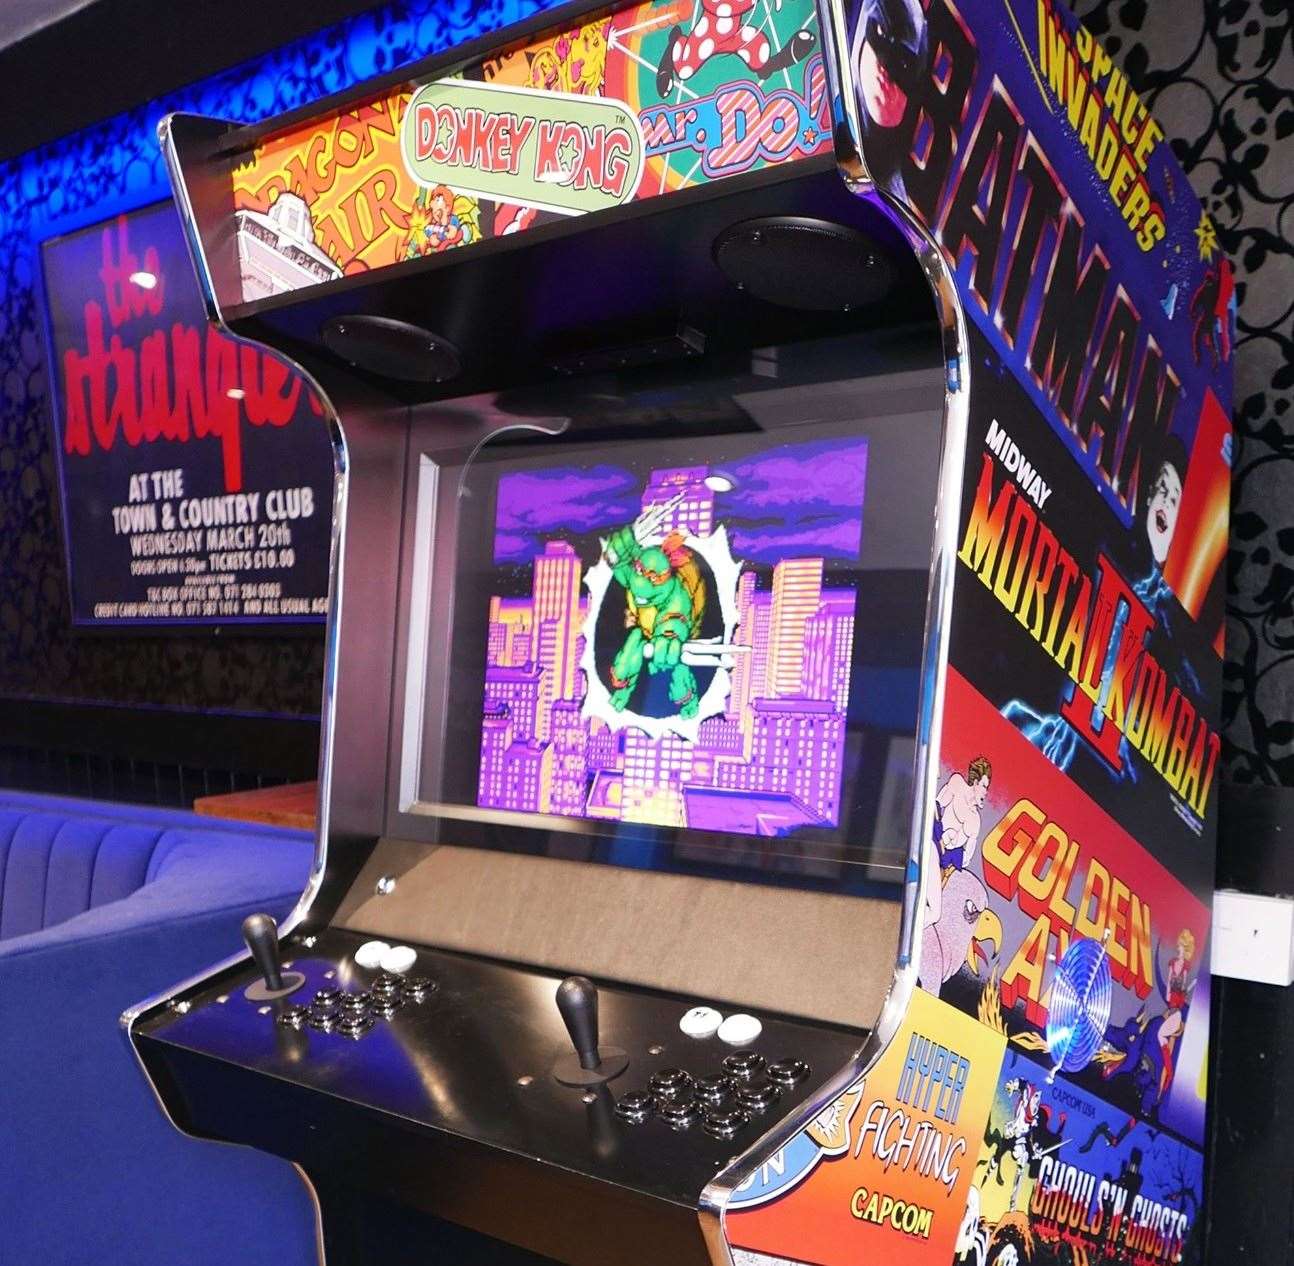 The Lady Luck has a retro arcade machine which is free to play